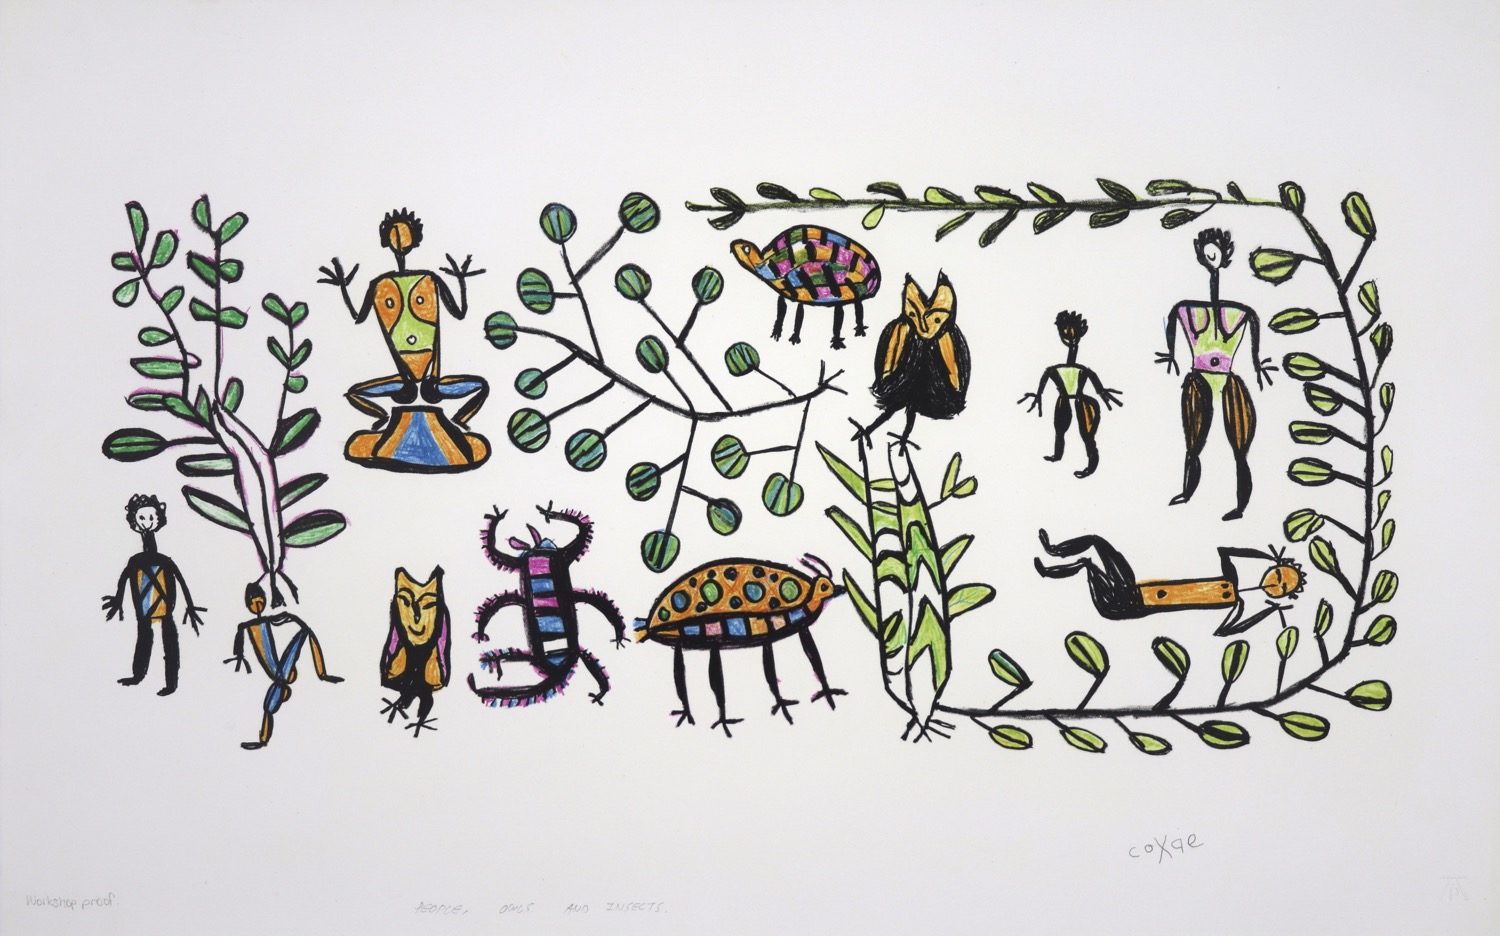 Human figures reduced to patterned forms  with birds and insects and surrounded by plant shapes